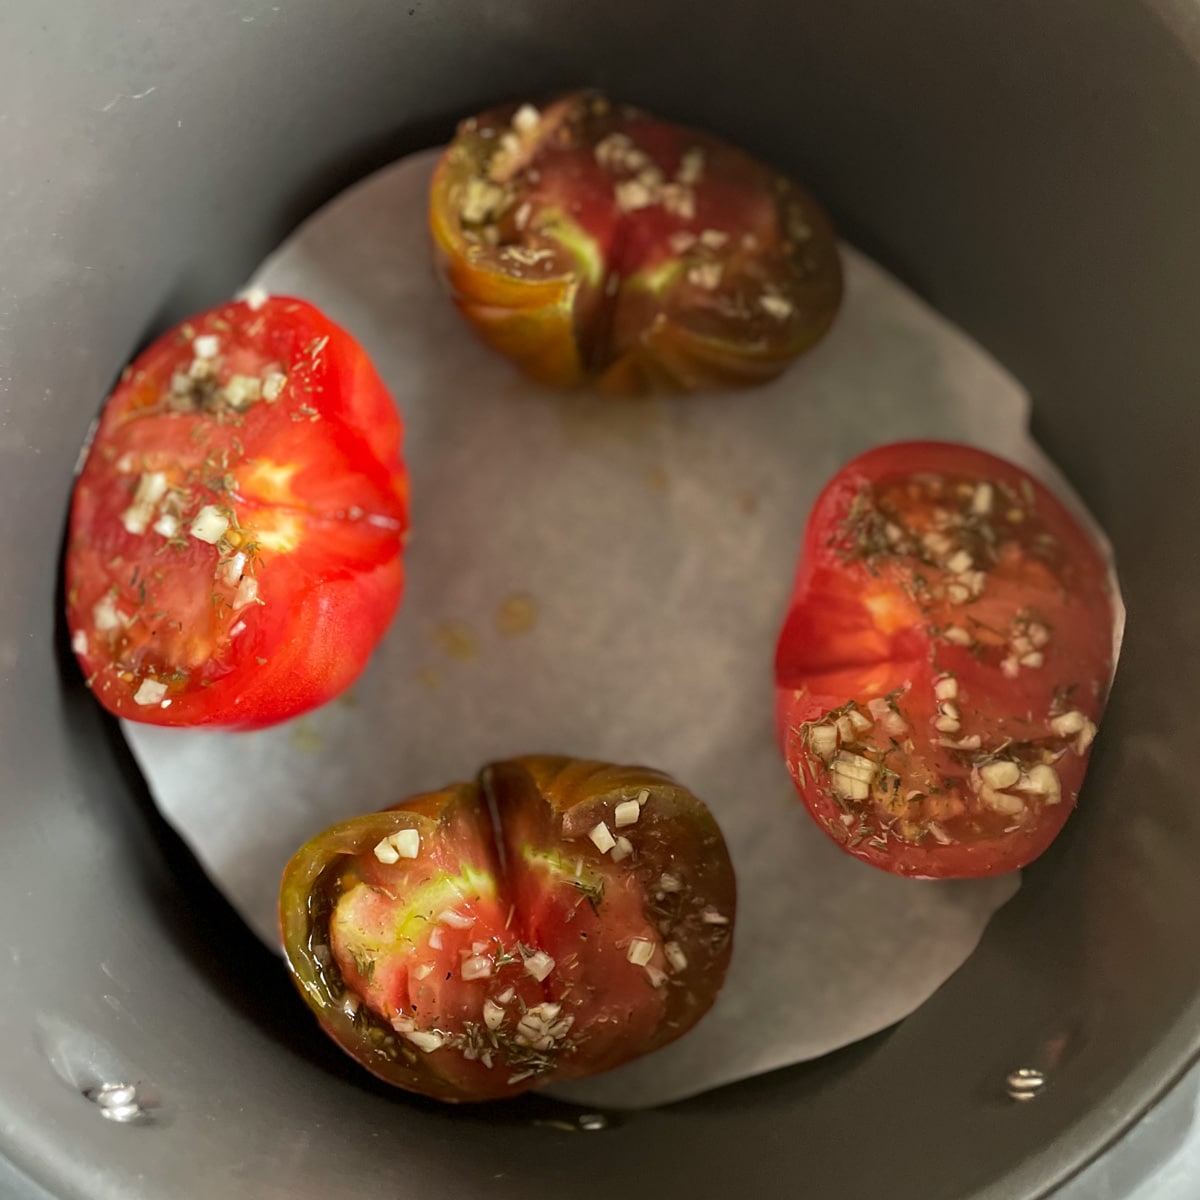 One halved heirloom red tomato and one halved purple and red heirloom tomato coated in oil, spices, and minced garlic sit on a piece of parchment paper in an air fryer basket.